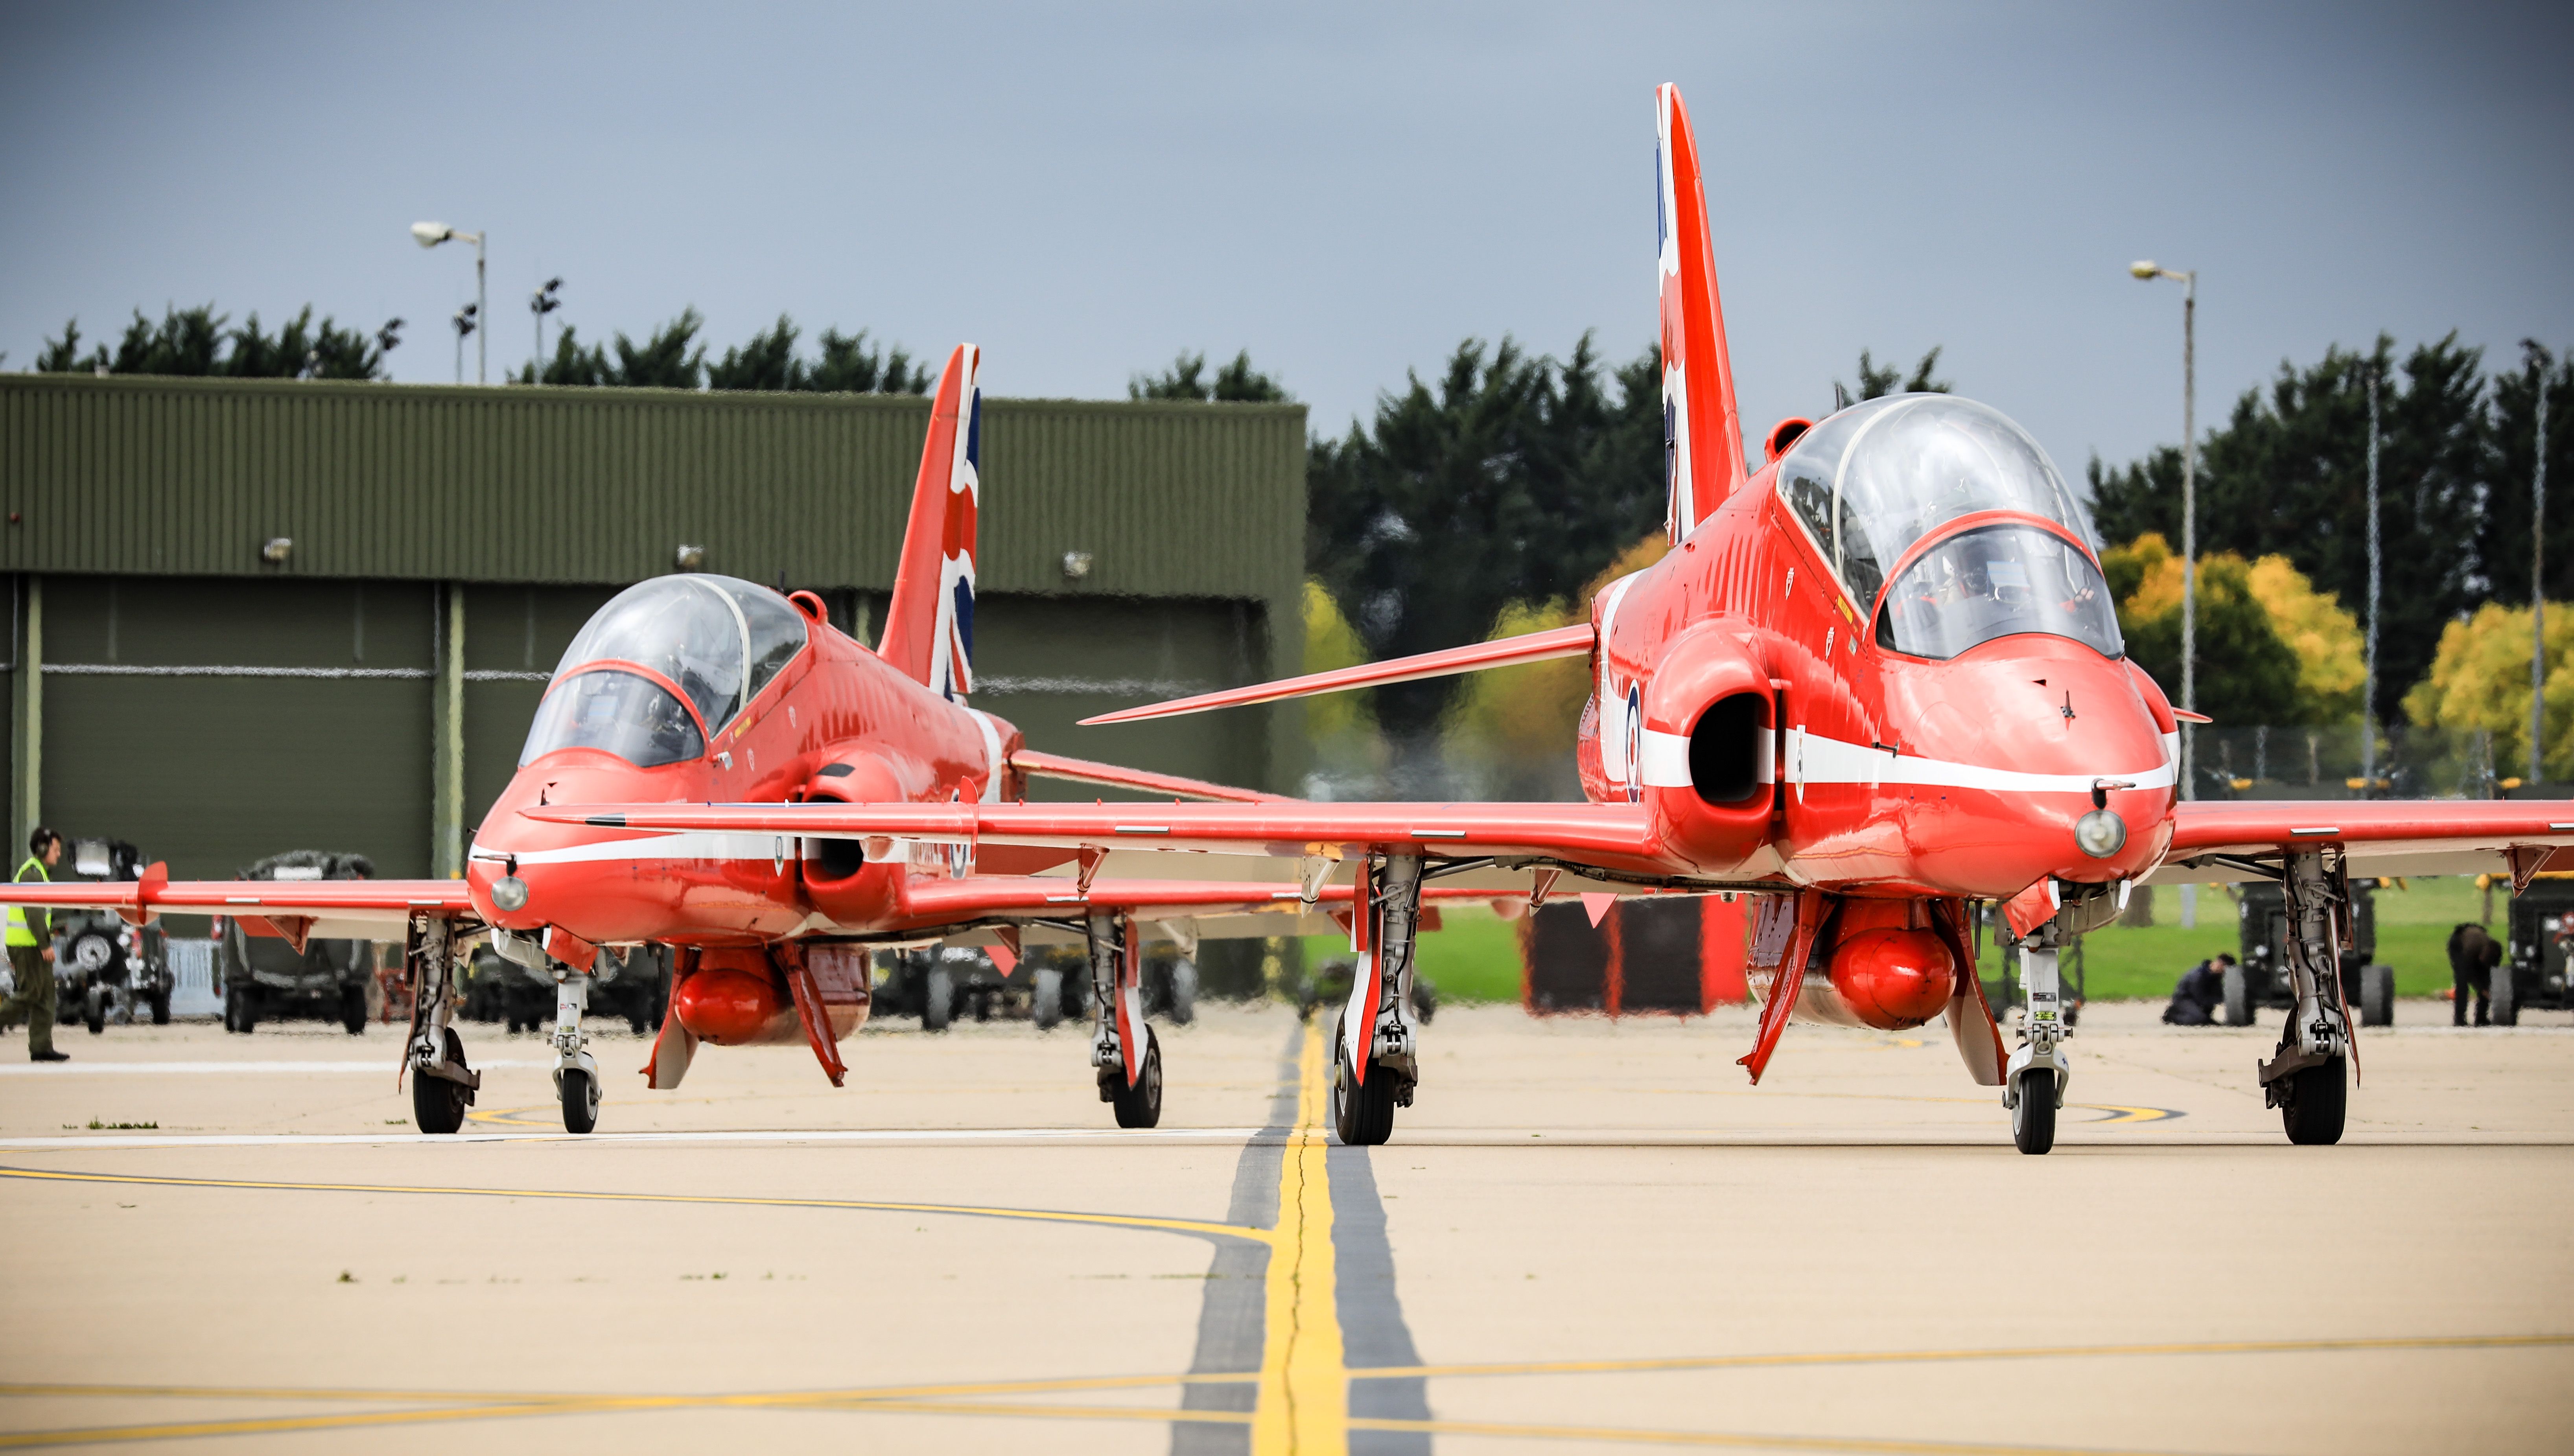 The Red Arrows have moved to RAF Waddington.